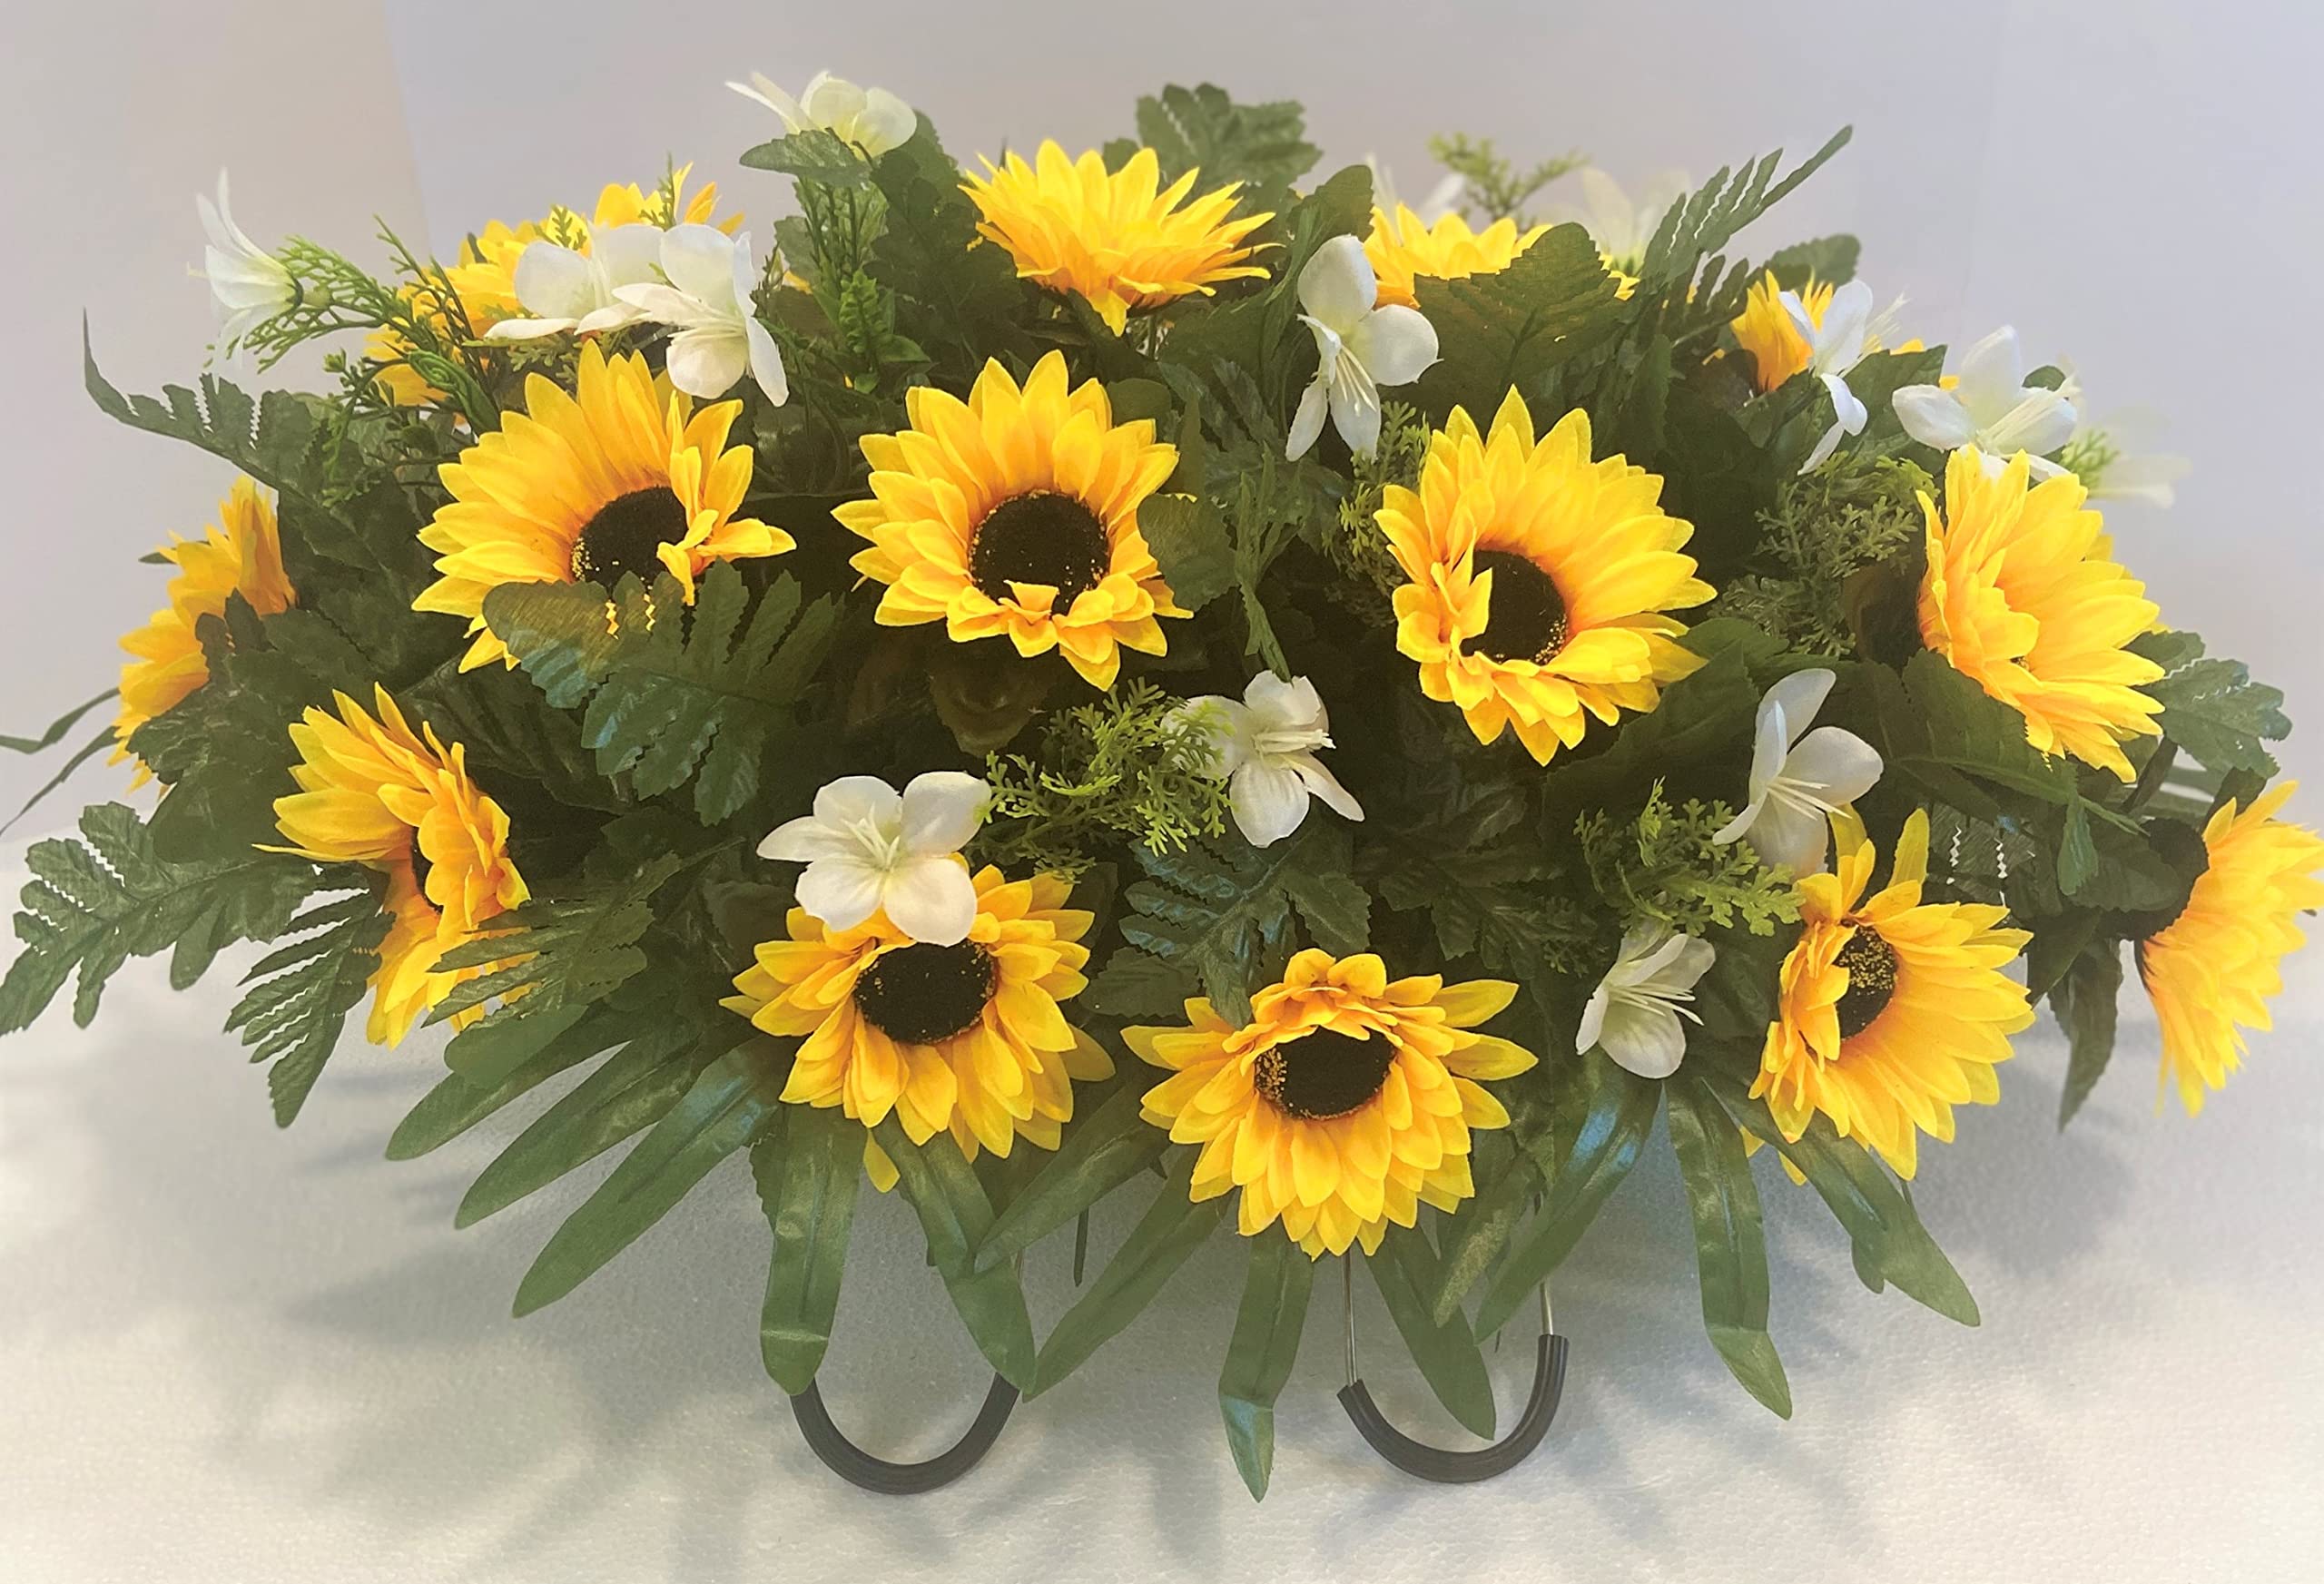 Cemetery Headstone Saddle Arrangement with Yellow Sunflowers and White Daisies-Grave Decoration